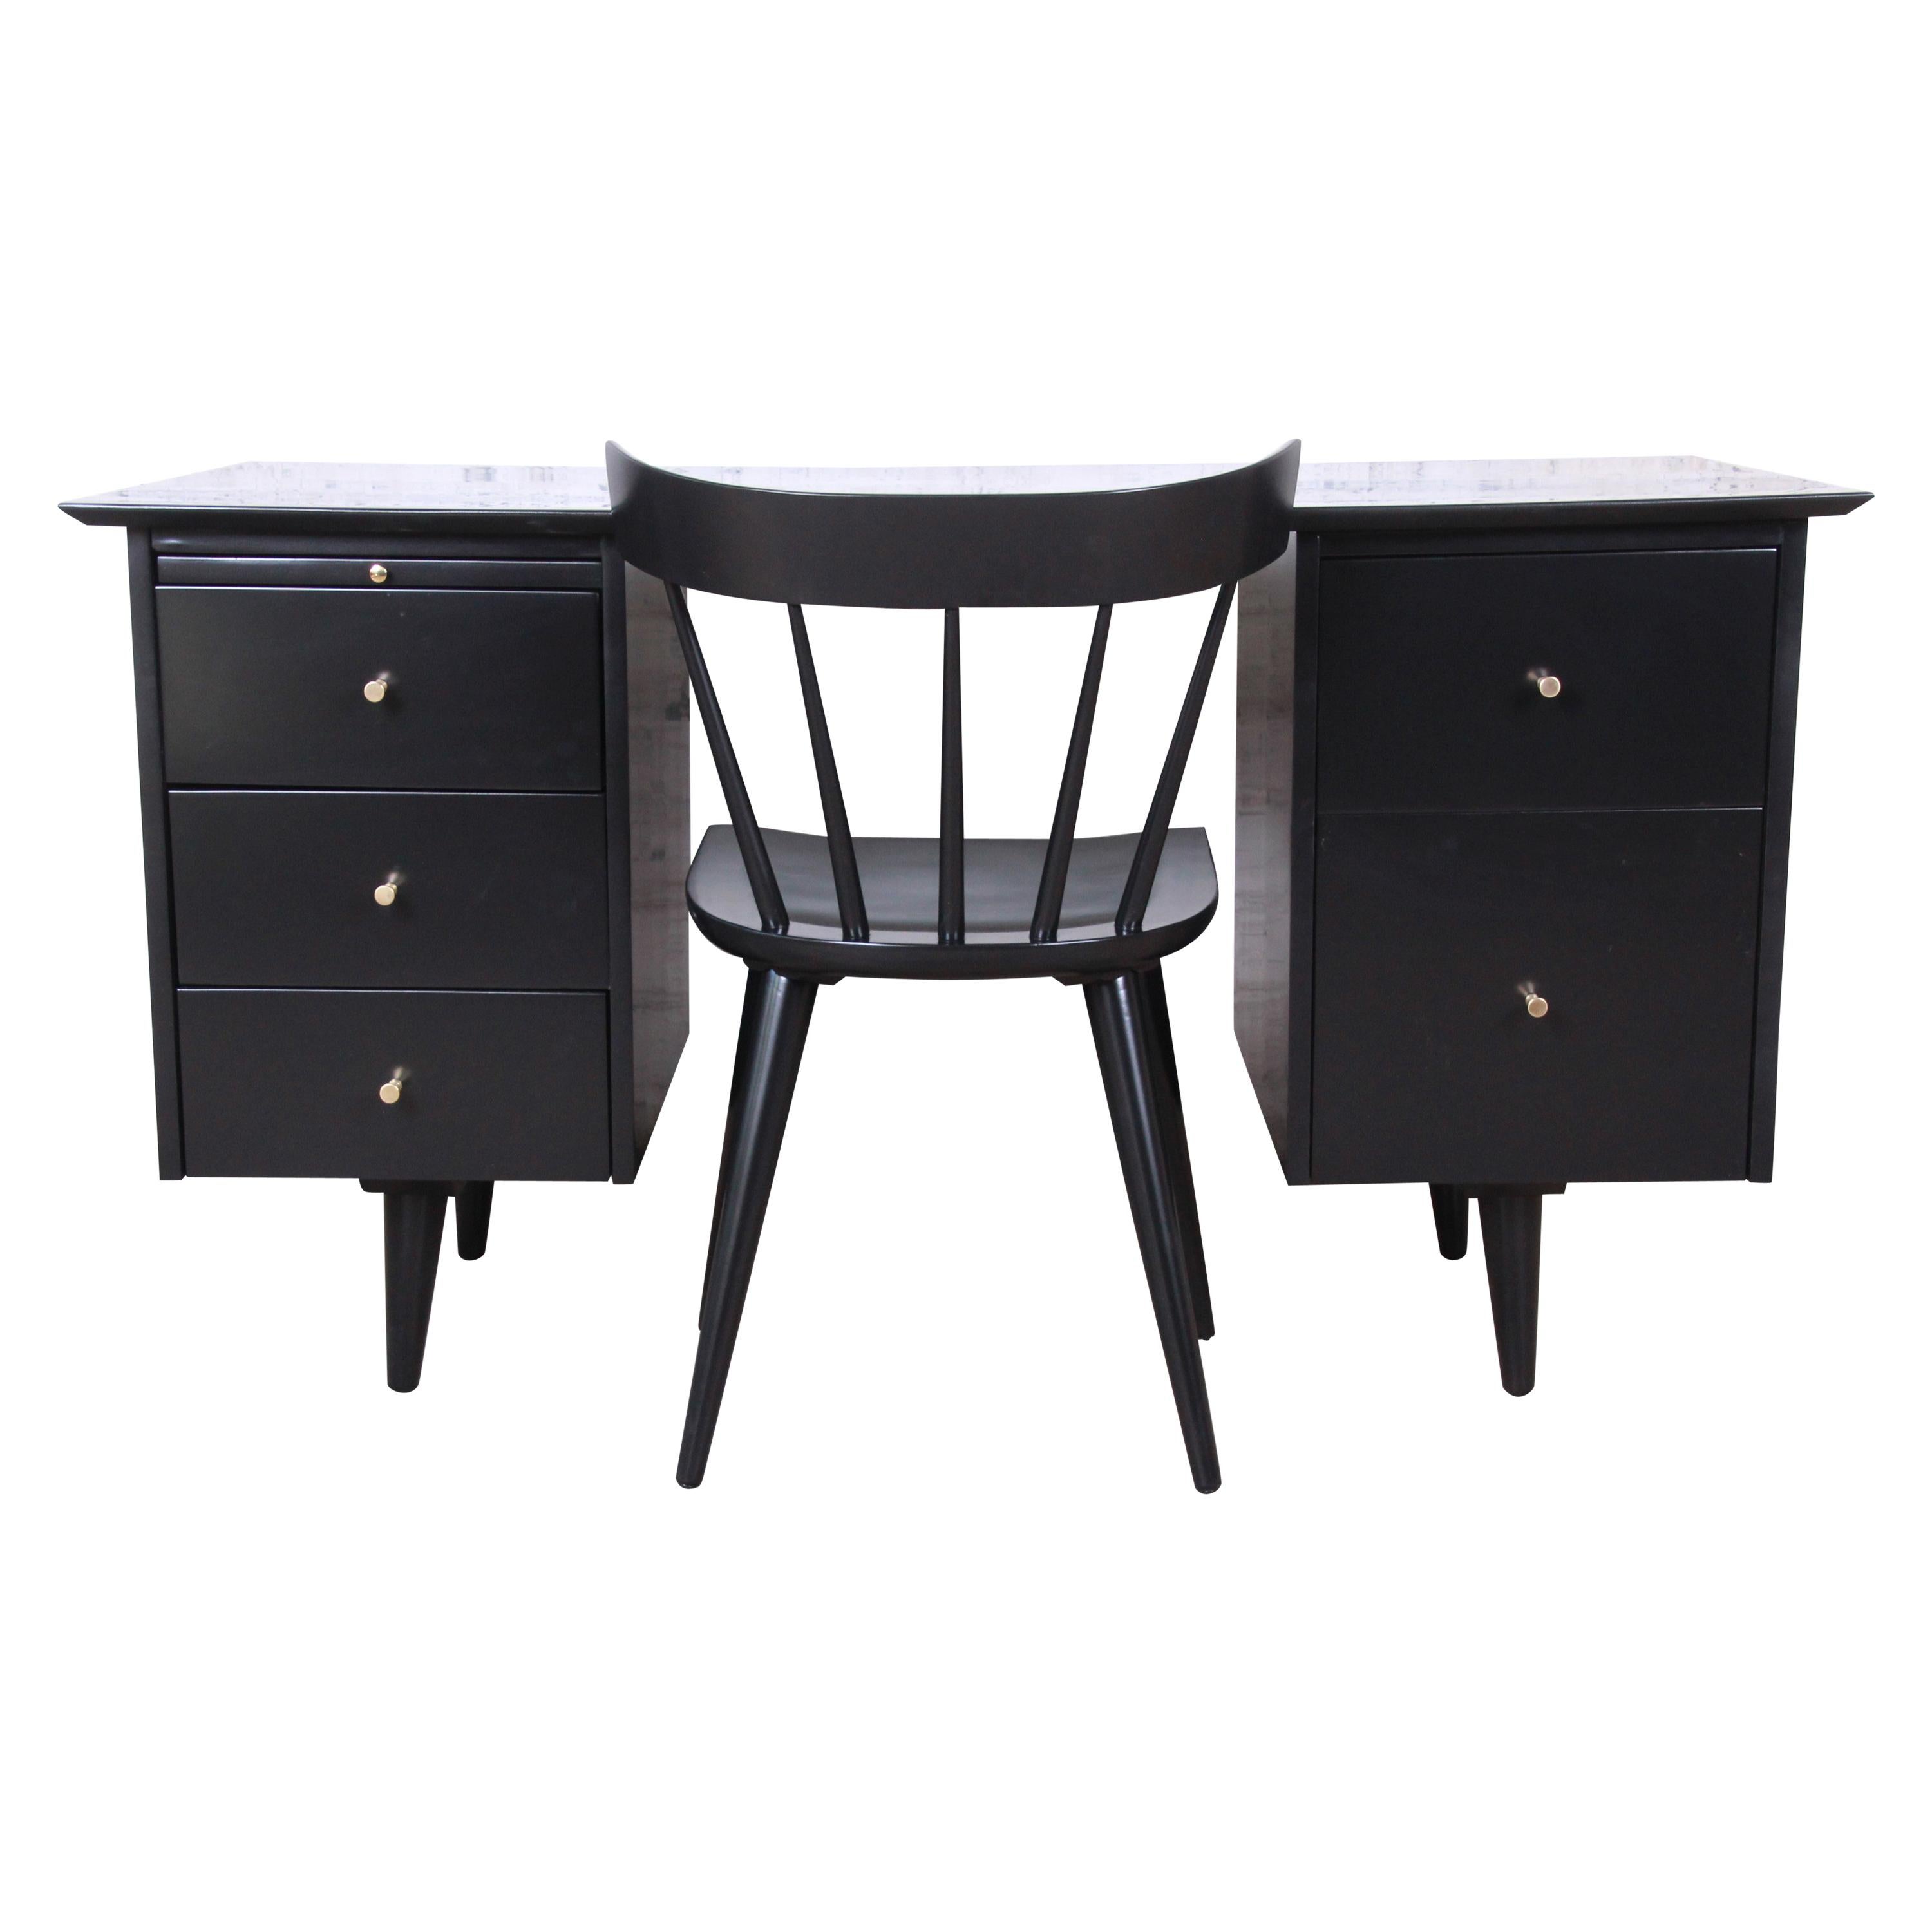 Paul McCobb Planner Group Black Lacquered Double Pedestal Desk and Chair, 1950s